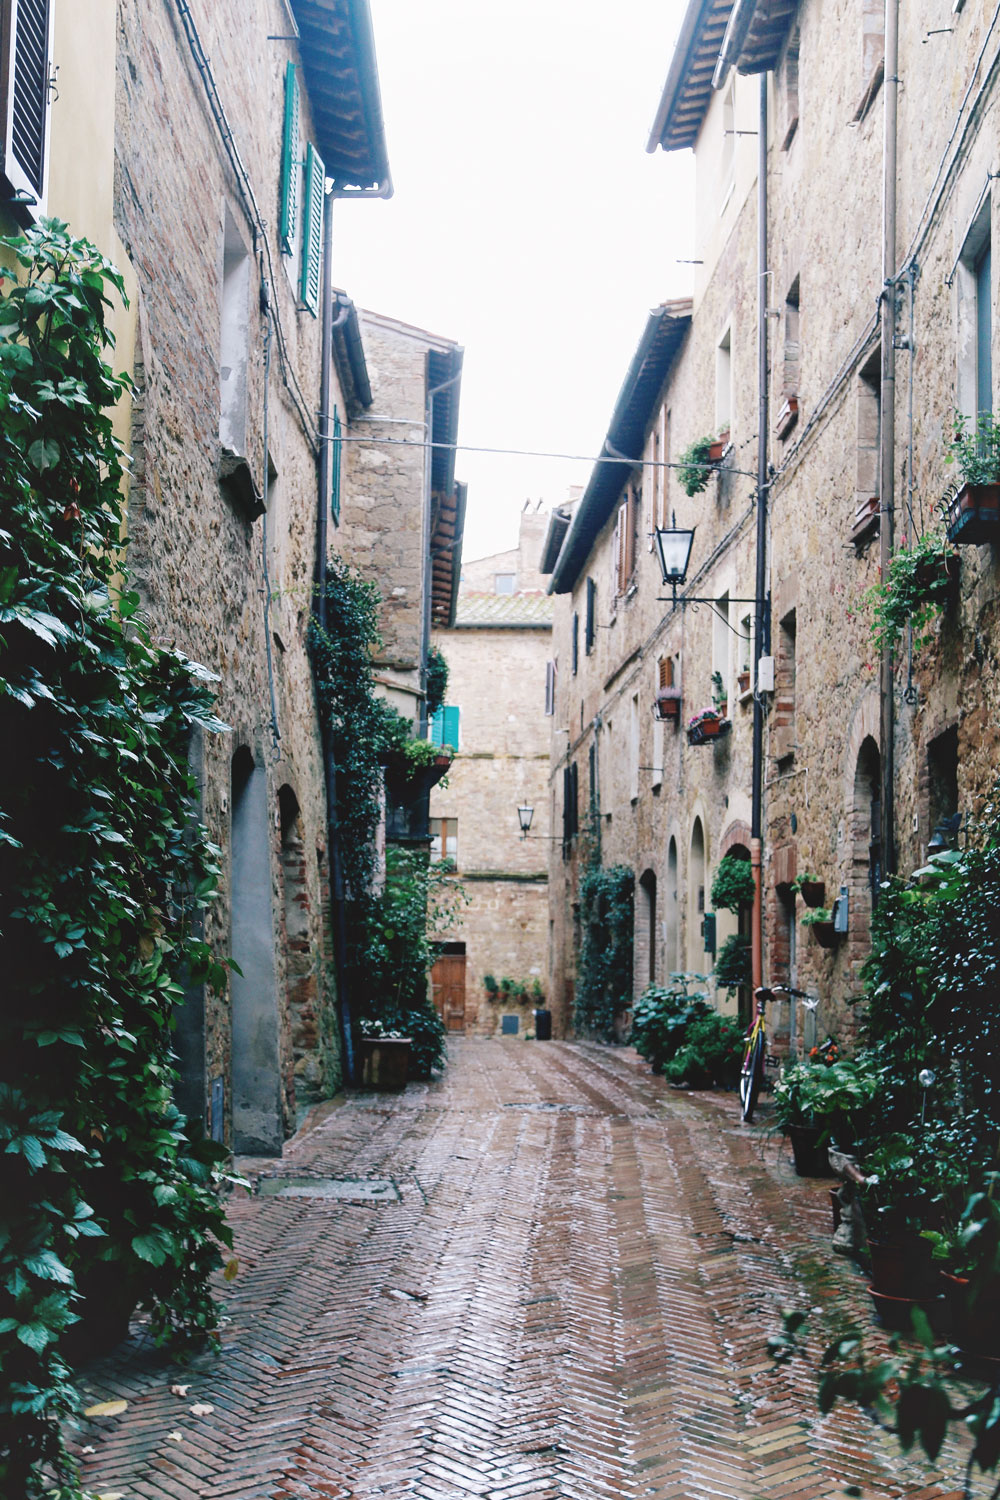 Tuscany travel guide, weekend guide to Tuscany, what to do in Tuscany, Siena Italy travel guide, Montepulciano guide, Pienza travel tips, Italy travel guide by To Vogue or Bust